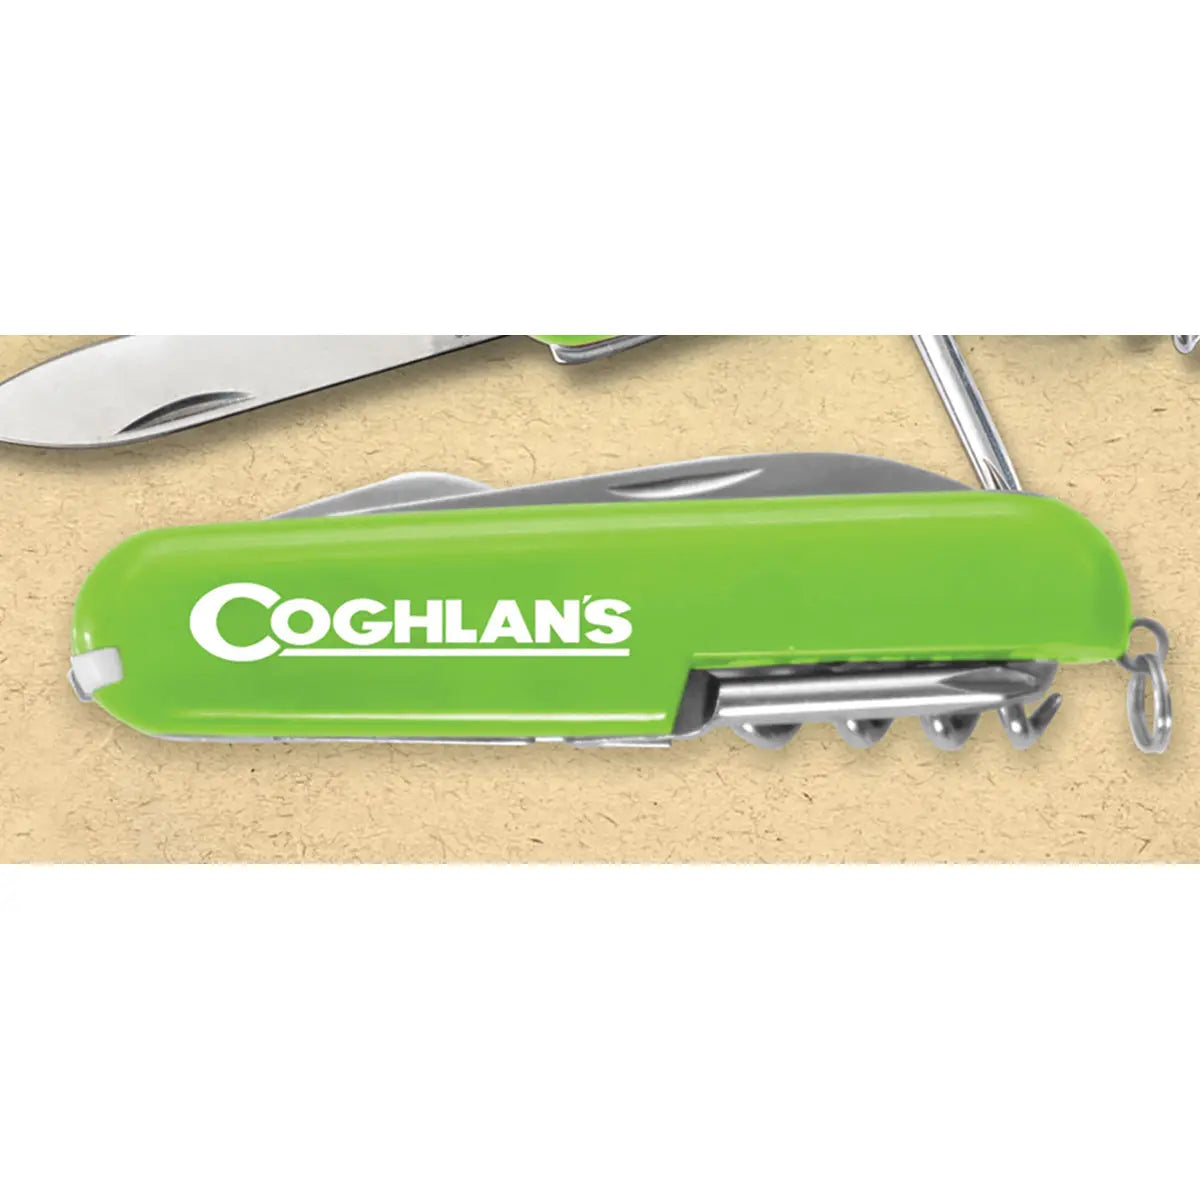 Coghlan's Multi-Function Camp Knife, 5 Functions, Army Camping Swiss Style Coghlan's